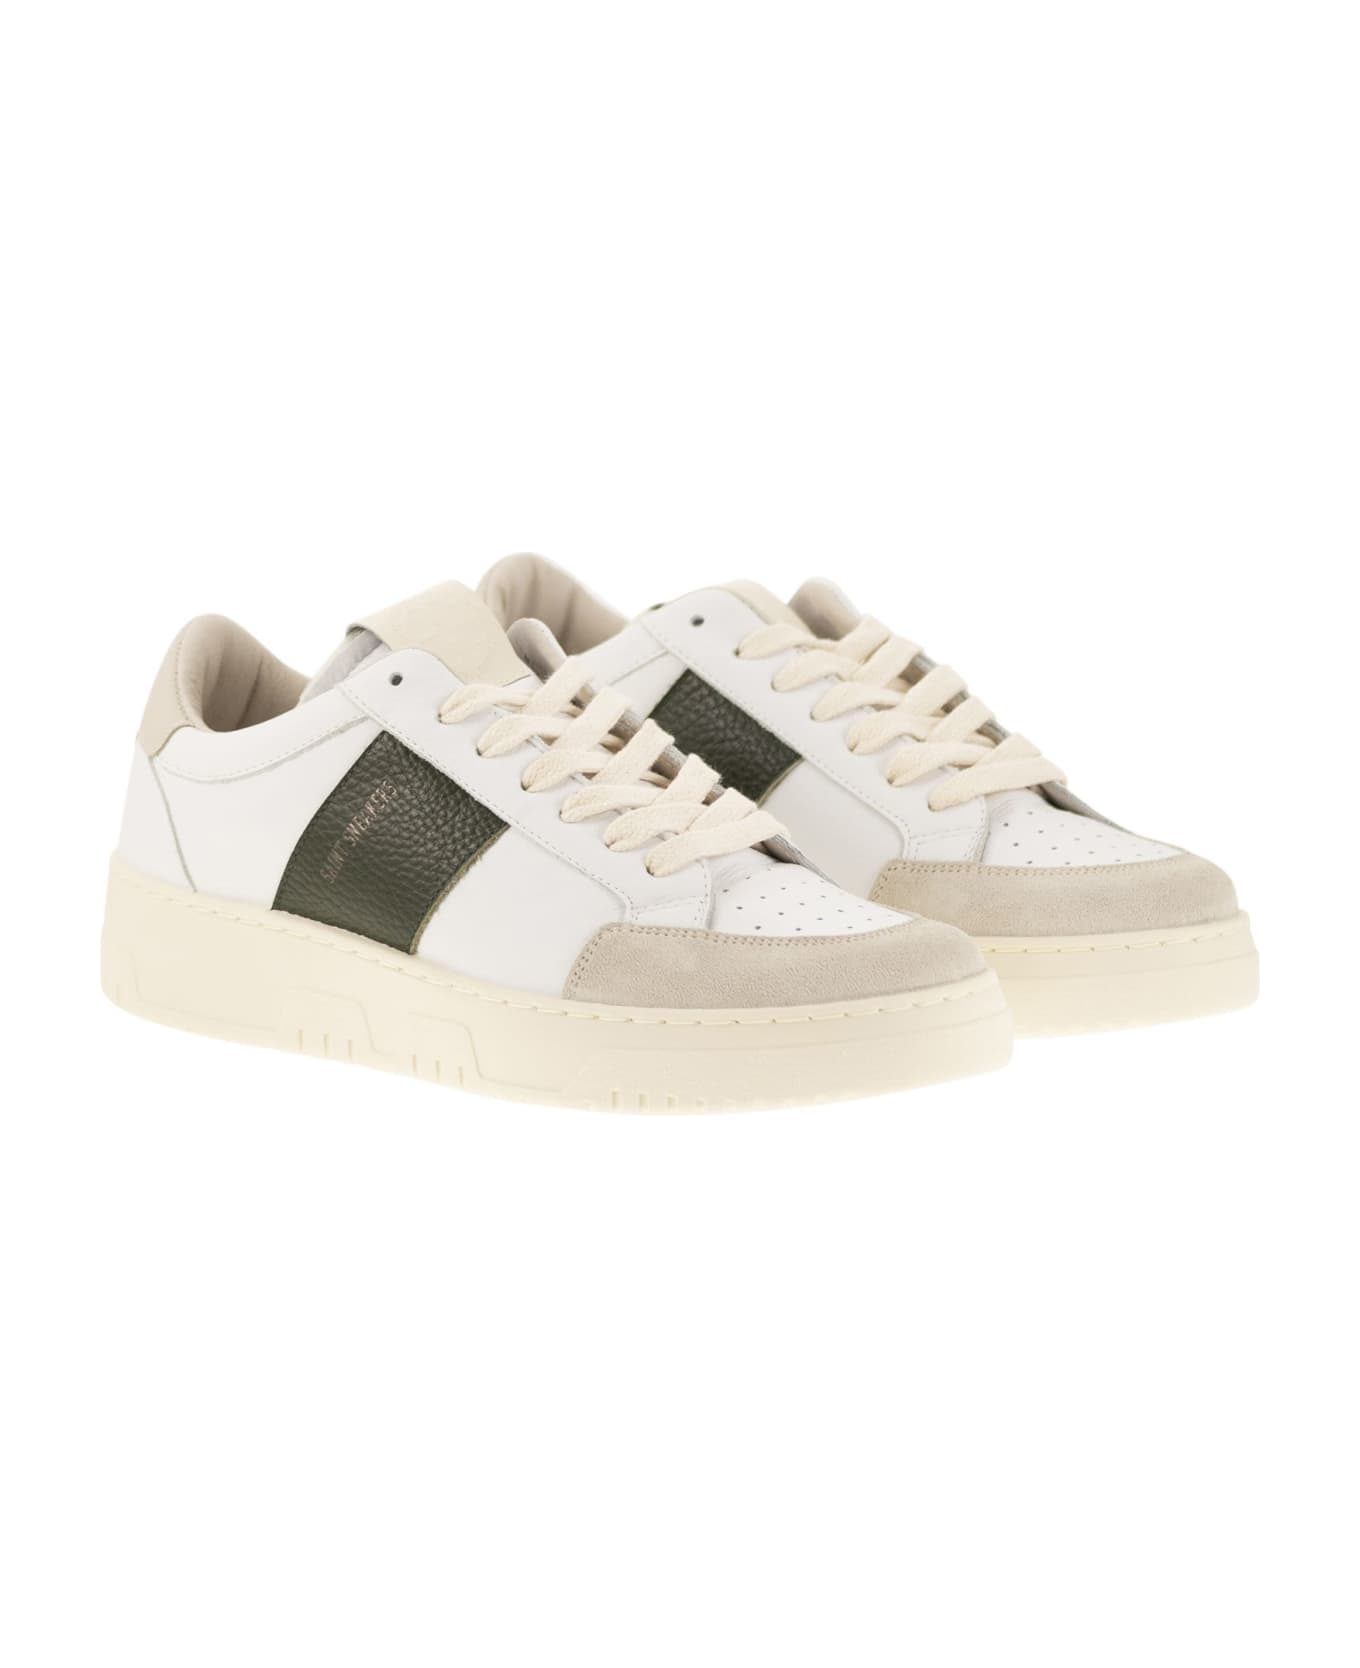 Saint Sneakers Sail - Leather And Suede Trainers - White/green スニーカー